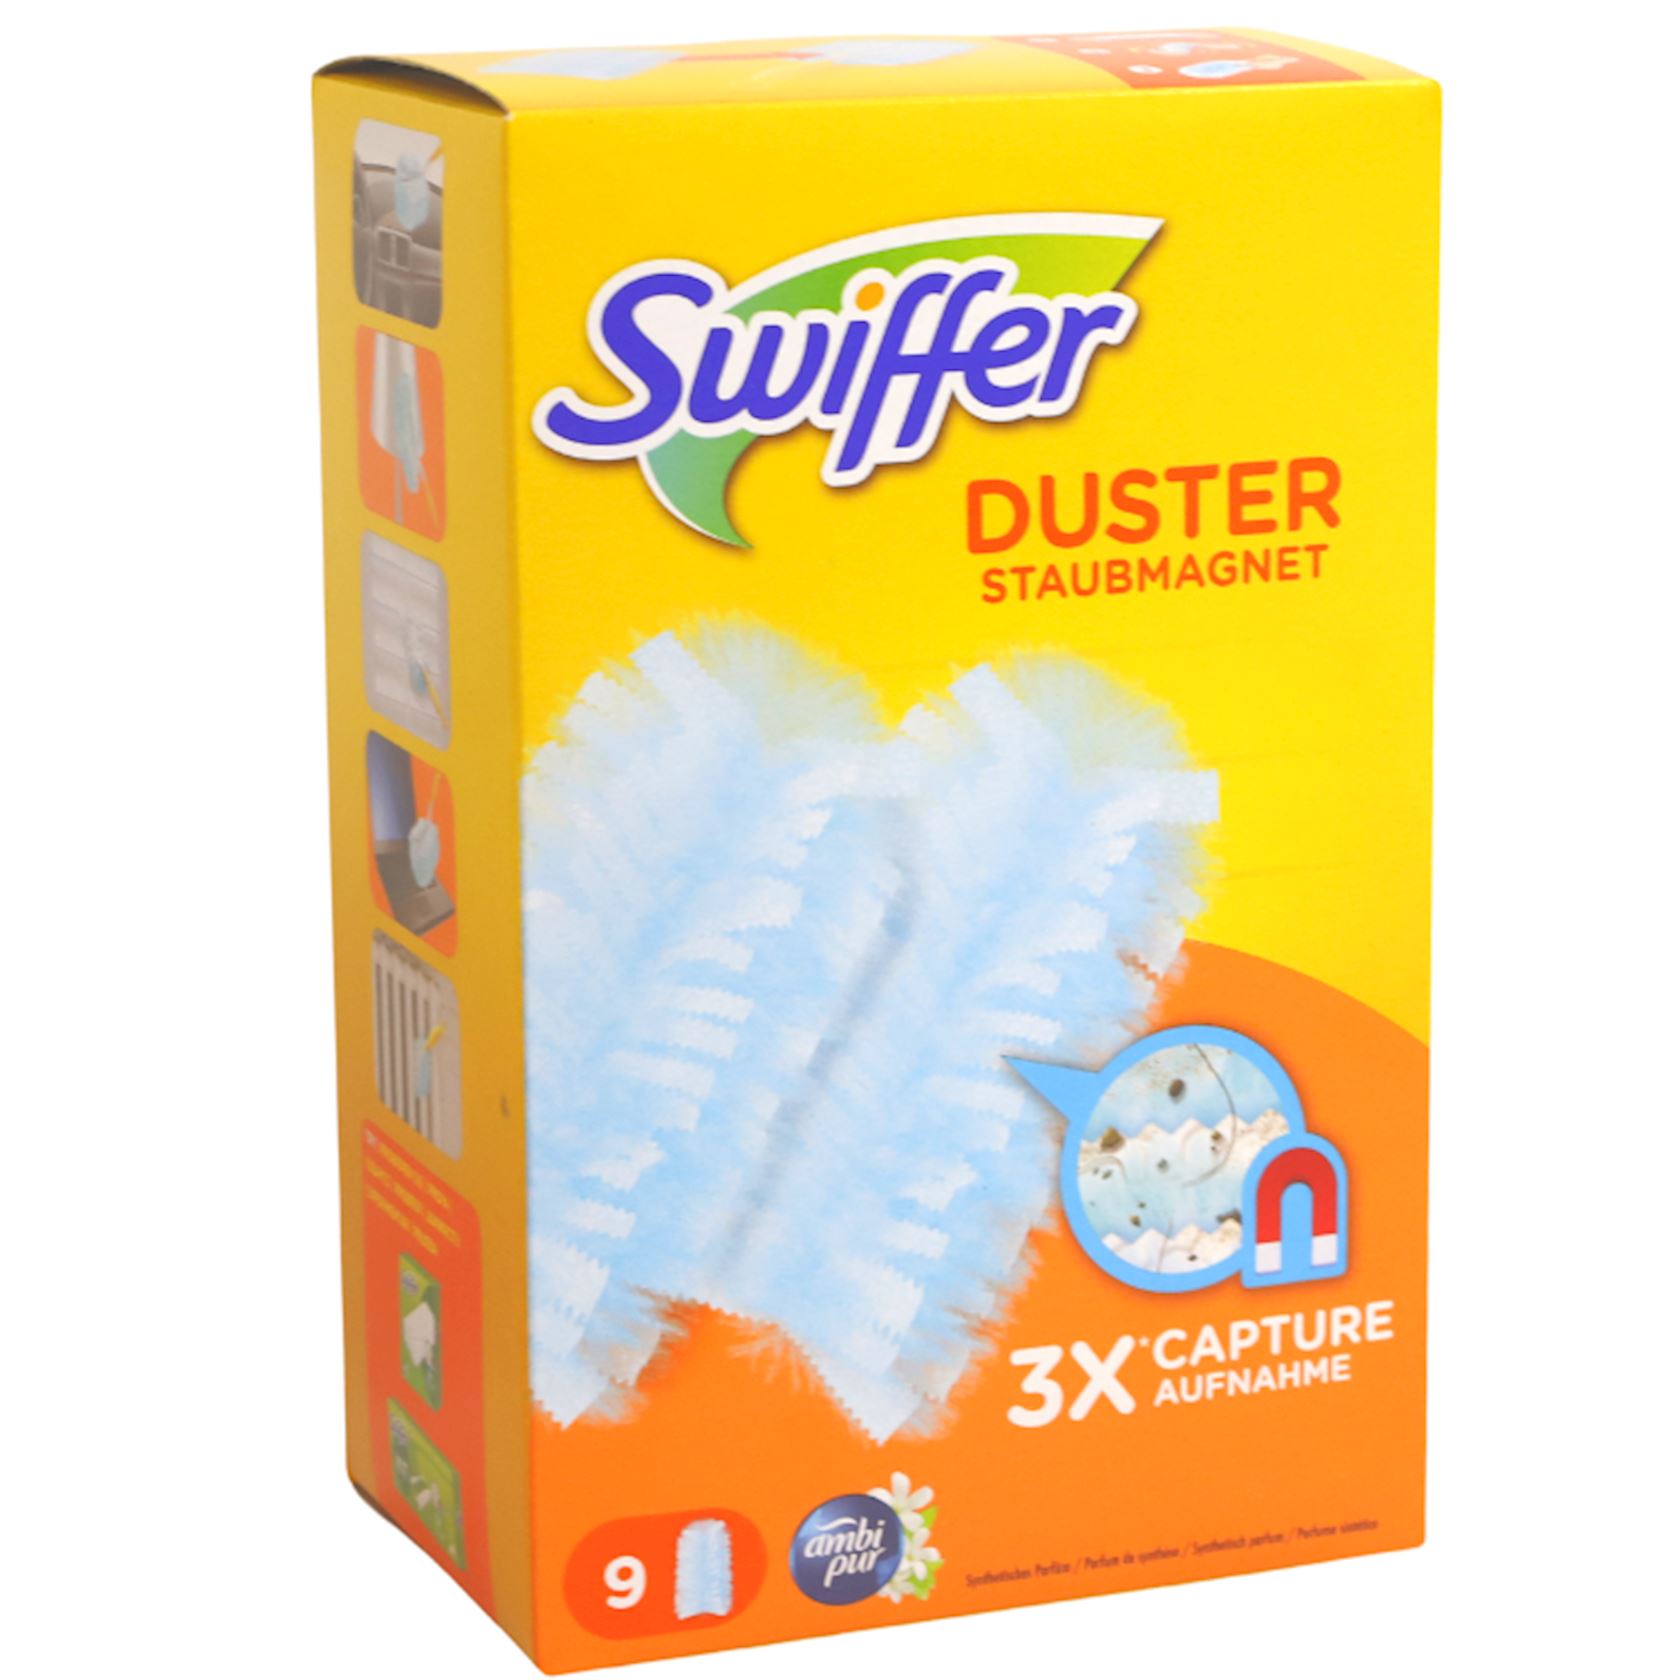 Swiffer-Duster-9-Dusters-navulling-ambi-pur